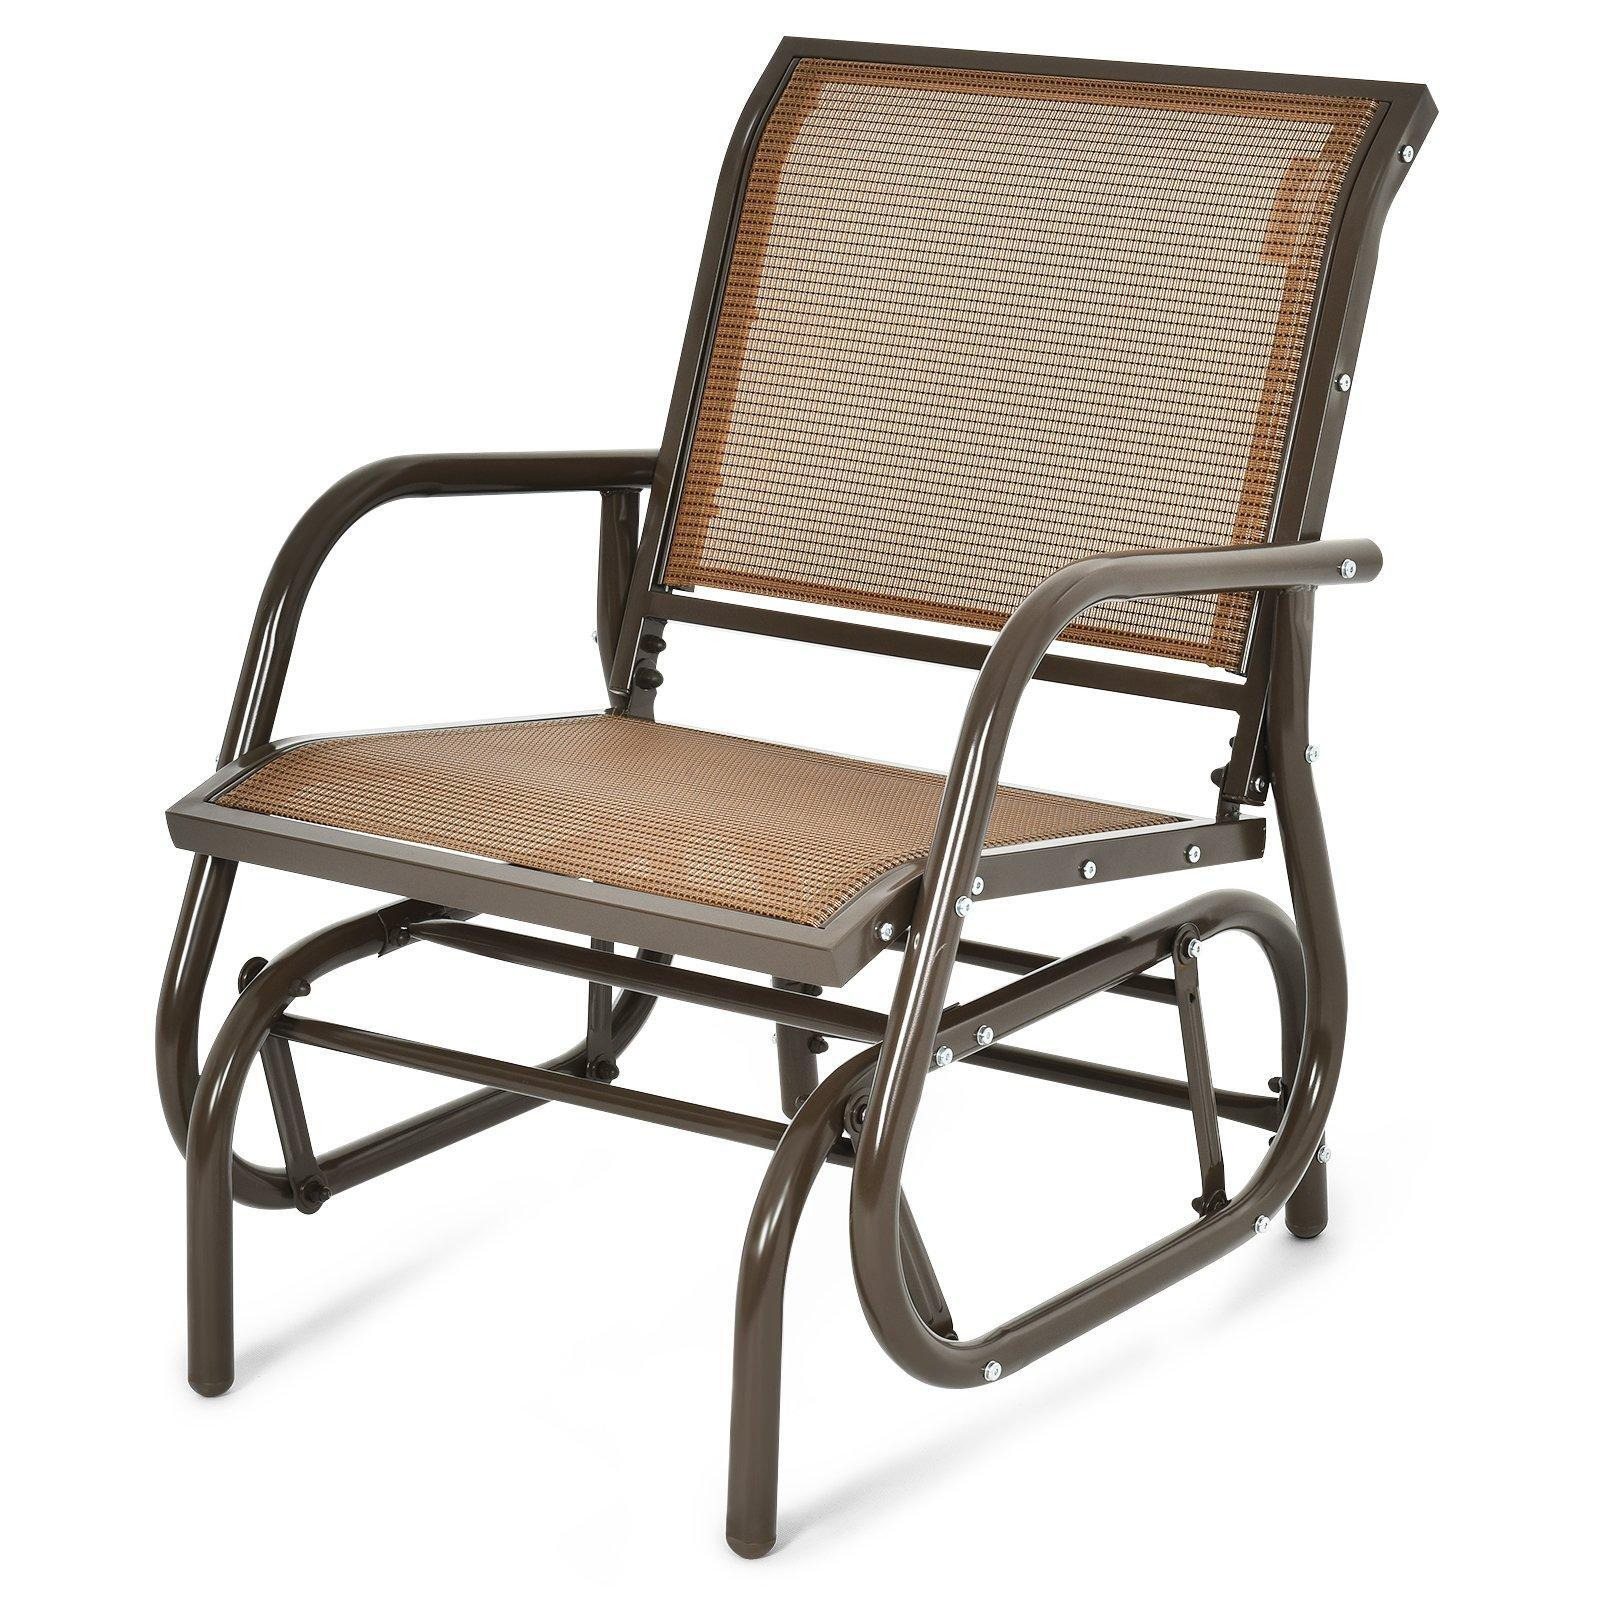 Swing Glider Chair Outdoor Rocking Chair Single Glider Patio Chair - image 1